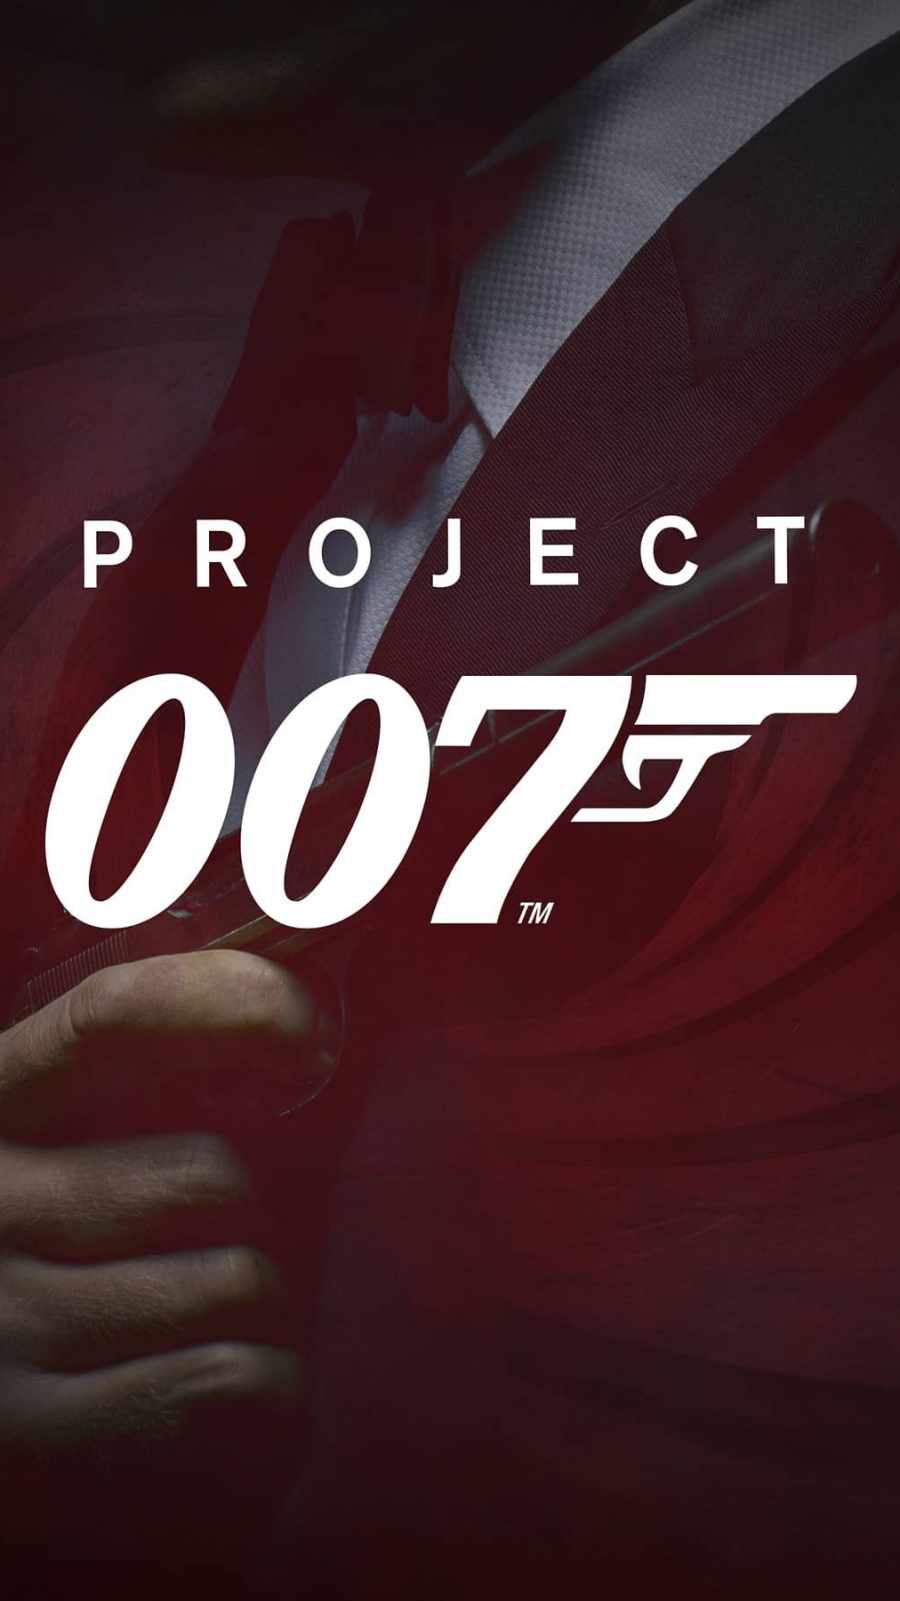 iPhone Wallpapers  Wallpapers for iPhone XS iPhone XR and iPhone X  iPhone  Wallpapers  James bond James bond movie posters Bond